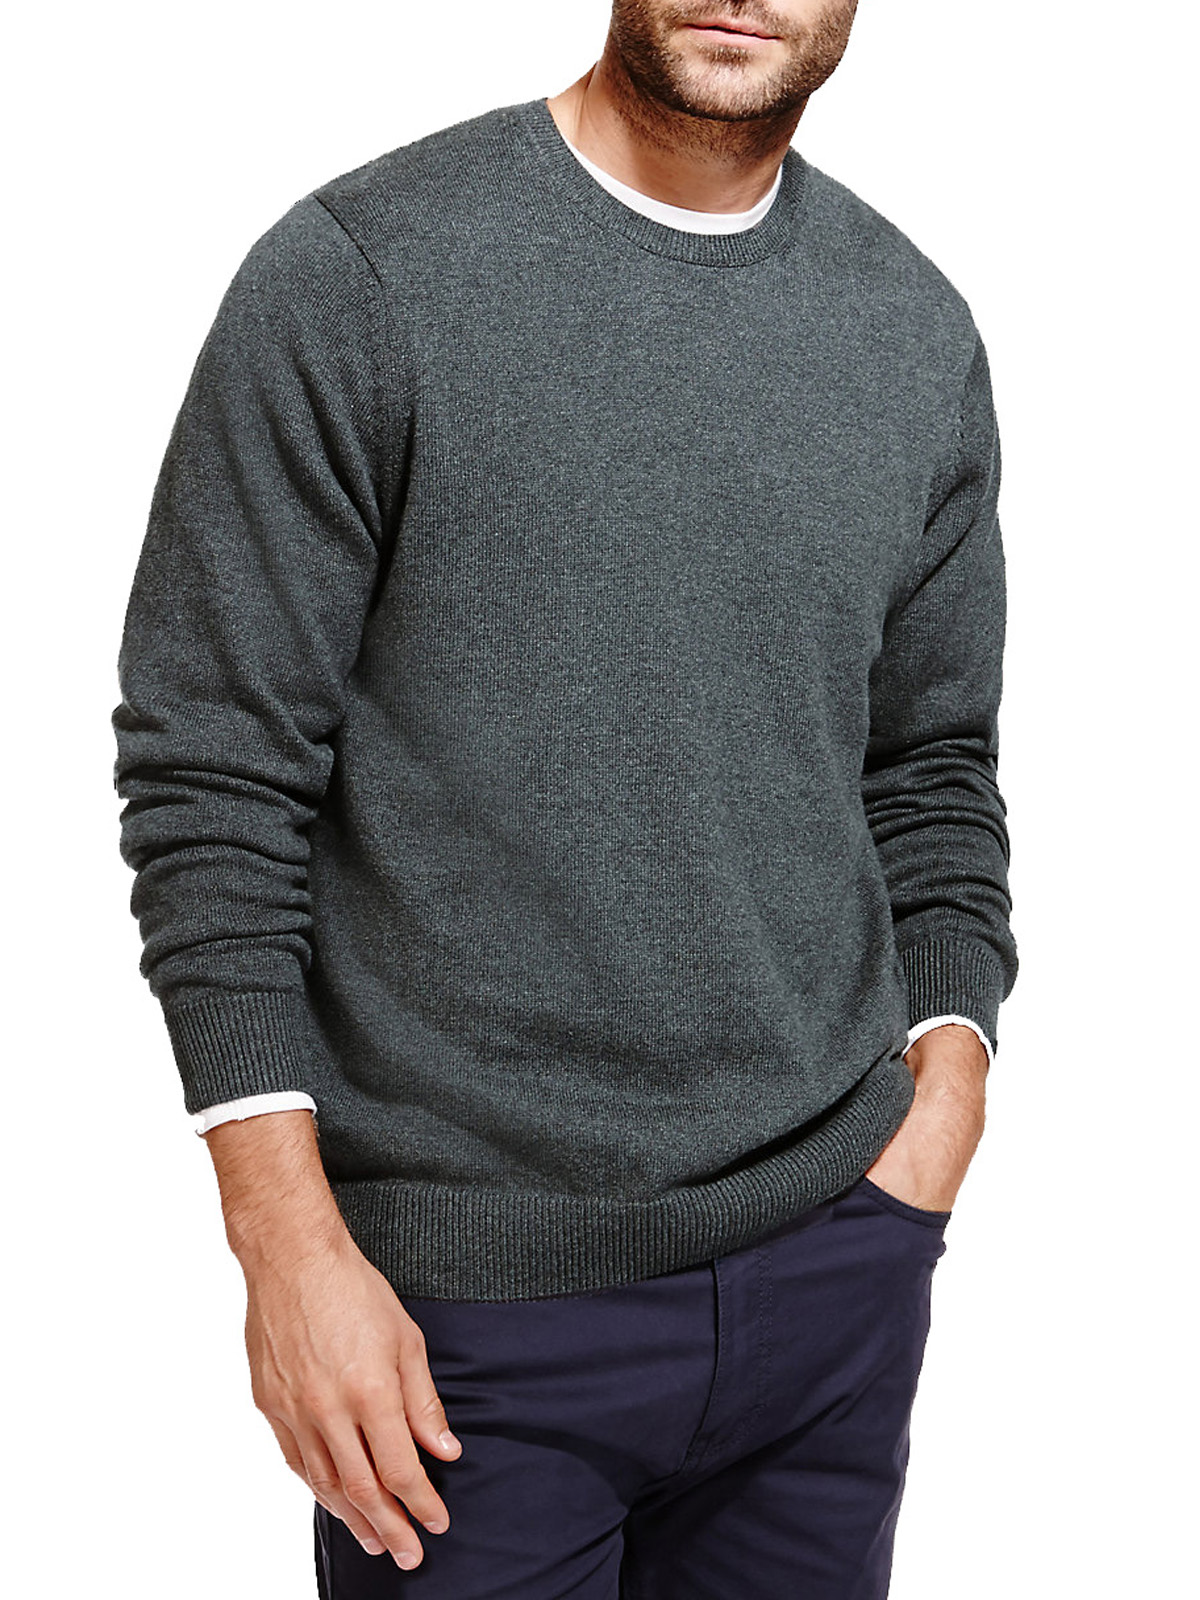 Marks and Spencer - - M&5 Mens PURPLE Long Sleeve Pure Cotton Crew Neck ...